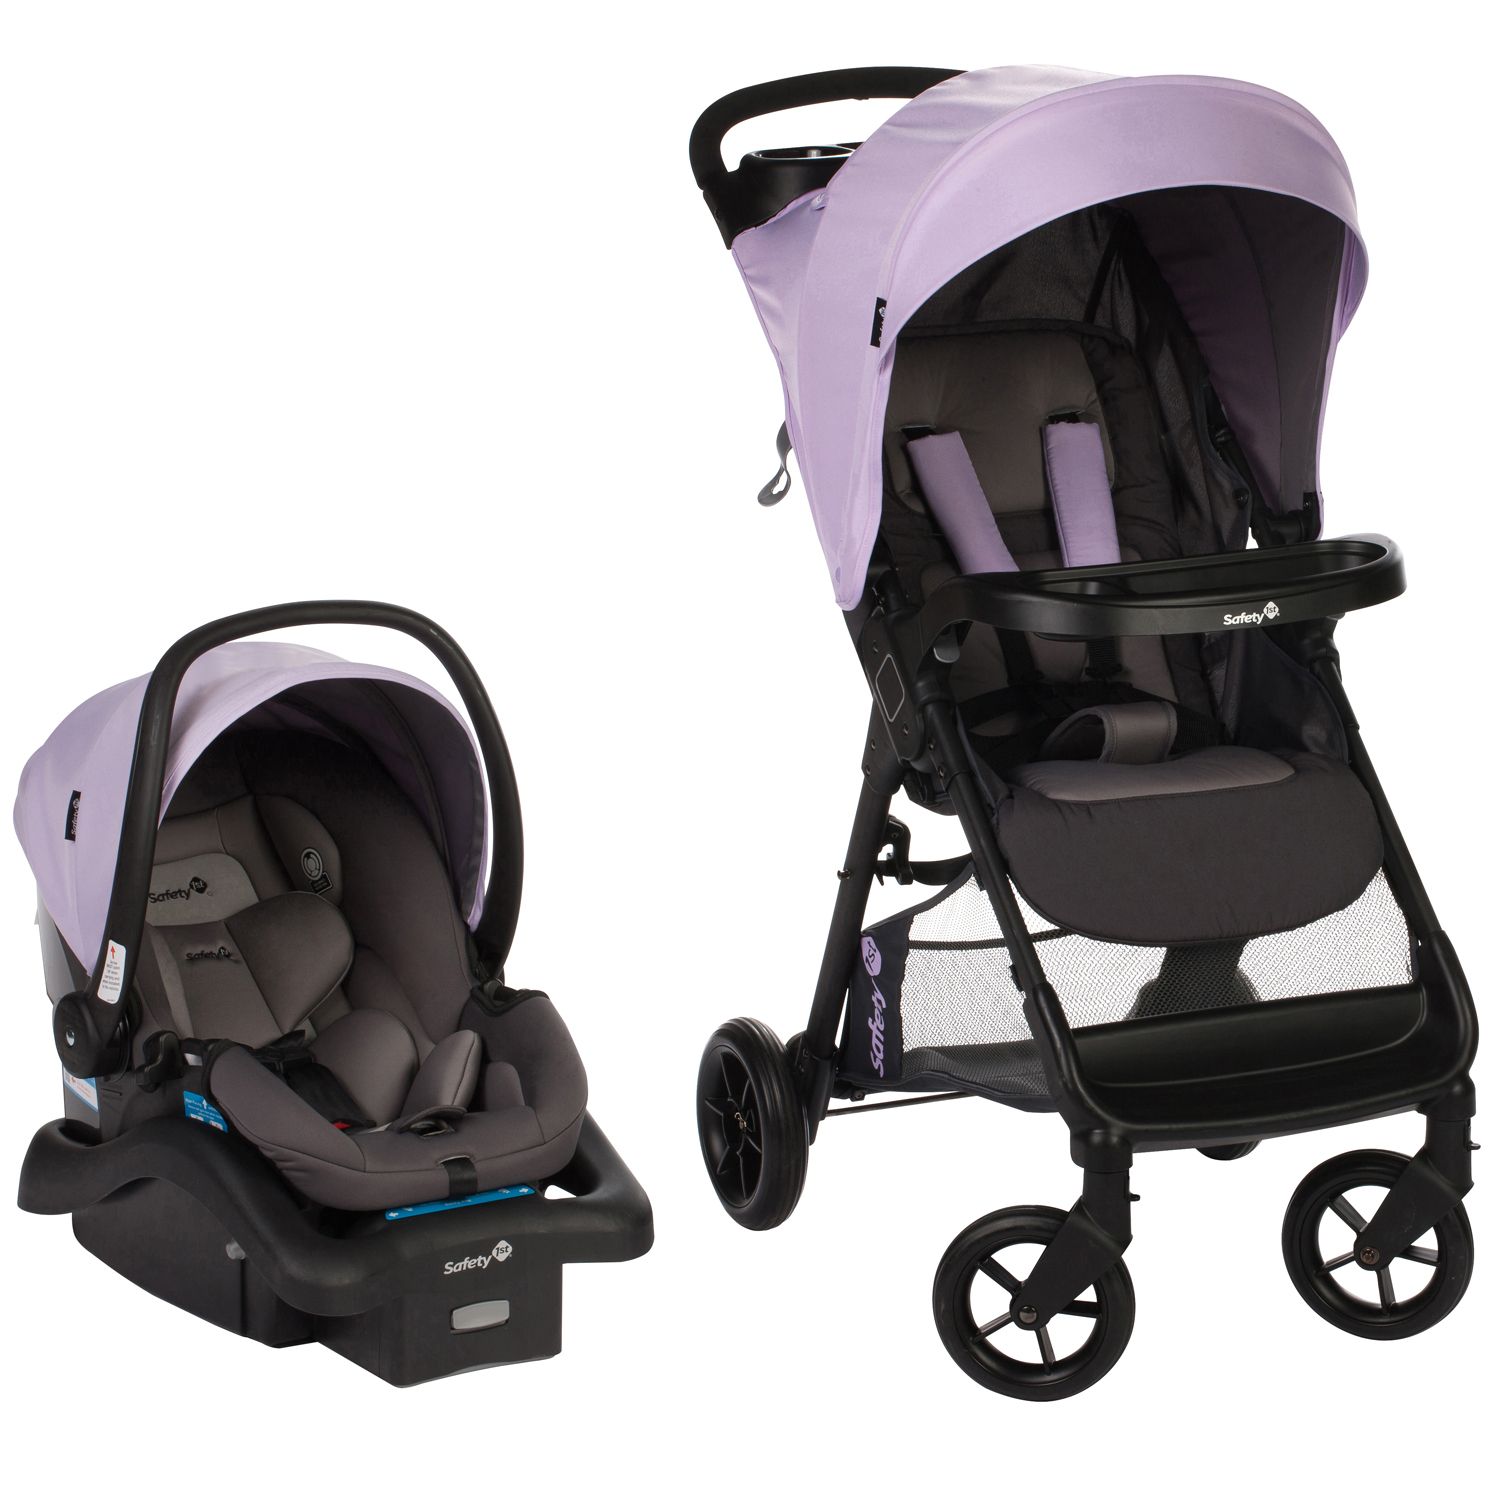 safety first riva travel system